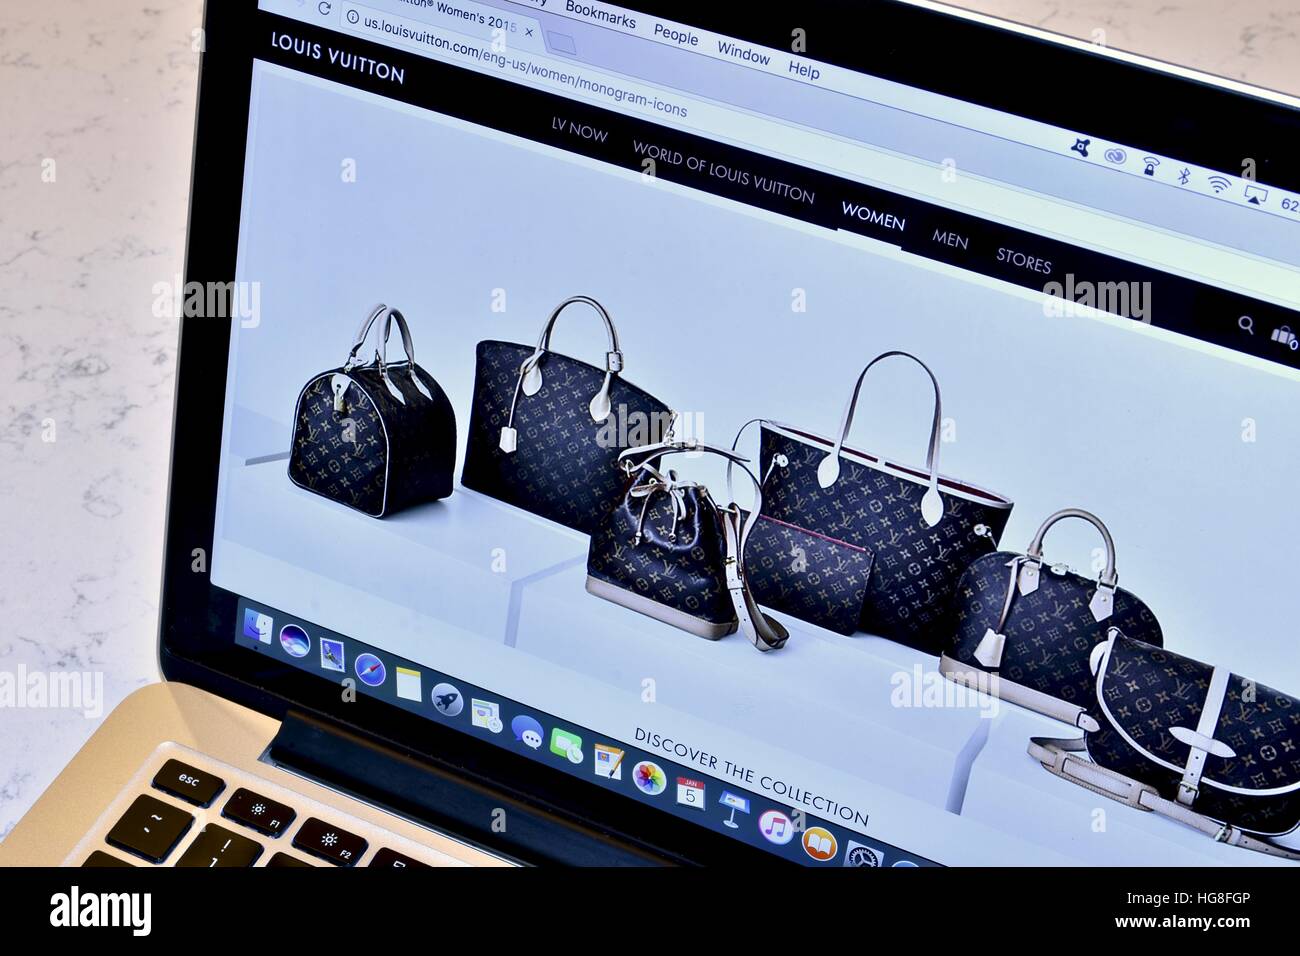 The Louis Vuitton Website Displayed On An Apple Macbook Pro Stock Photo Alamy